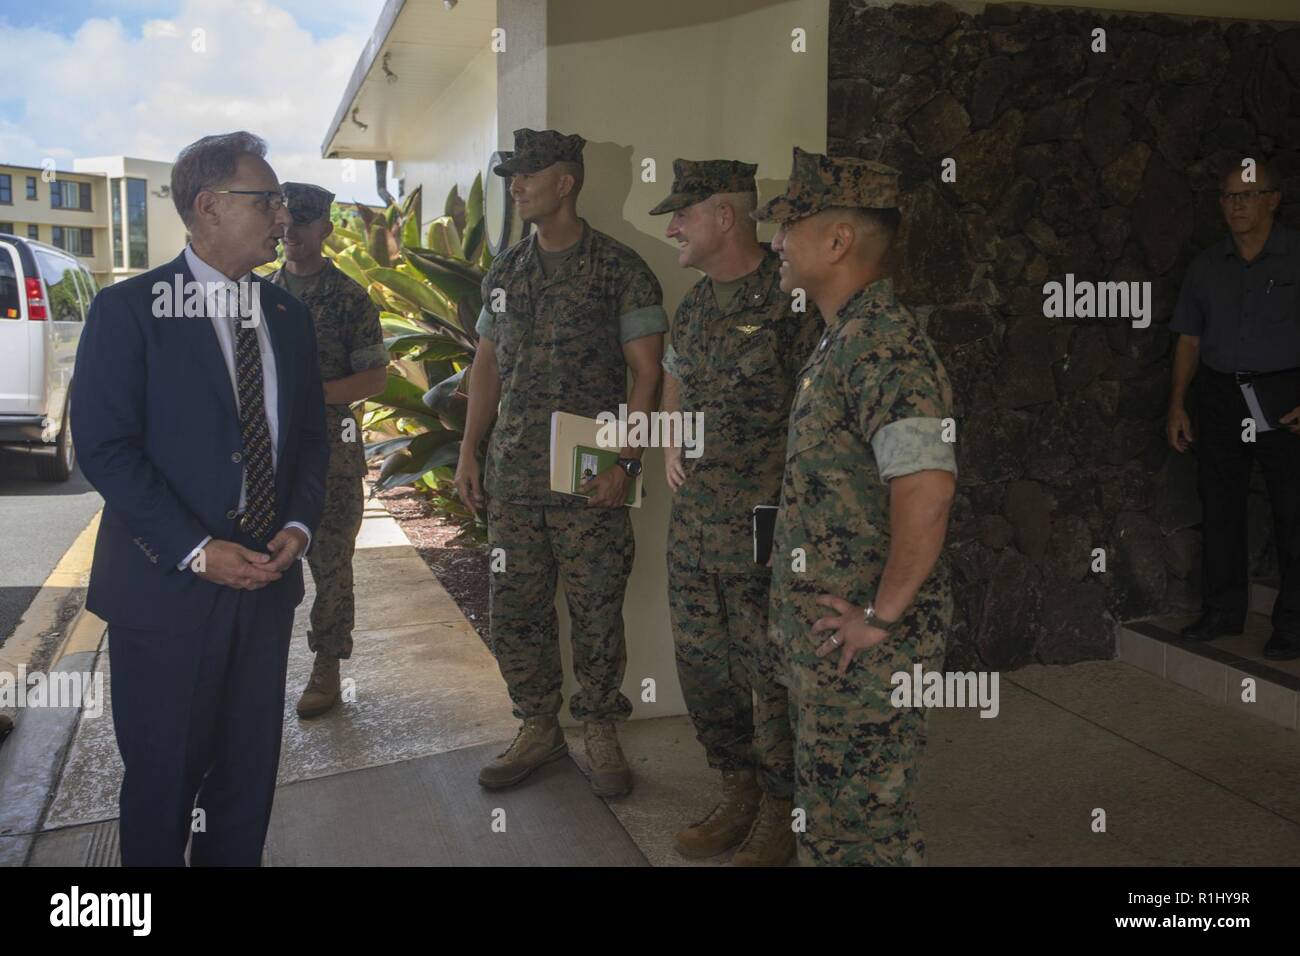 Under Secretary of the Navy, the Honorable Thomas B. Modly (left), is greeted by Brig. Gen. Robert Sofge (second from the right), deputy commander, U.S. Marine Corps Forces, Pacific, Col. Raul Lianez (right), commanding officer, Marine Corps Base Hawaii (MCBH), and Col. Stephen Lightfoot, commanding officer, Marine Aircraft Group 24, at the Officer’s Club during his visit to MCBH, Sept 21, 2018. Modly engaged with senior leaders from U.S. Marine Corps Forces, Pacific, Marine Corps Base Hawaii, and Marine Aircraft Group 24 to gain a better understanding of the aviation units and readiness of Ma Stock Photo